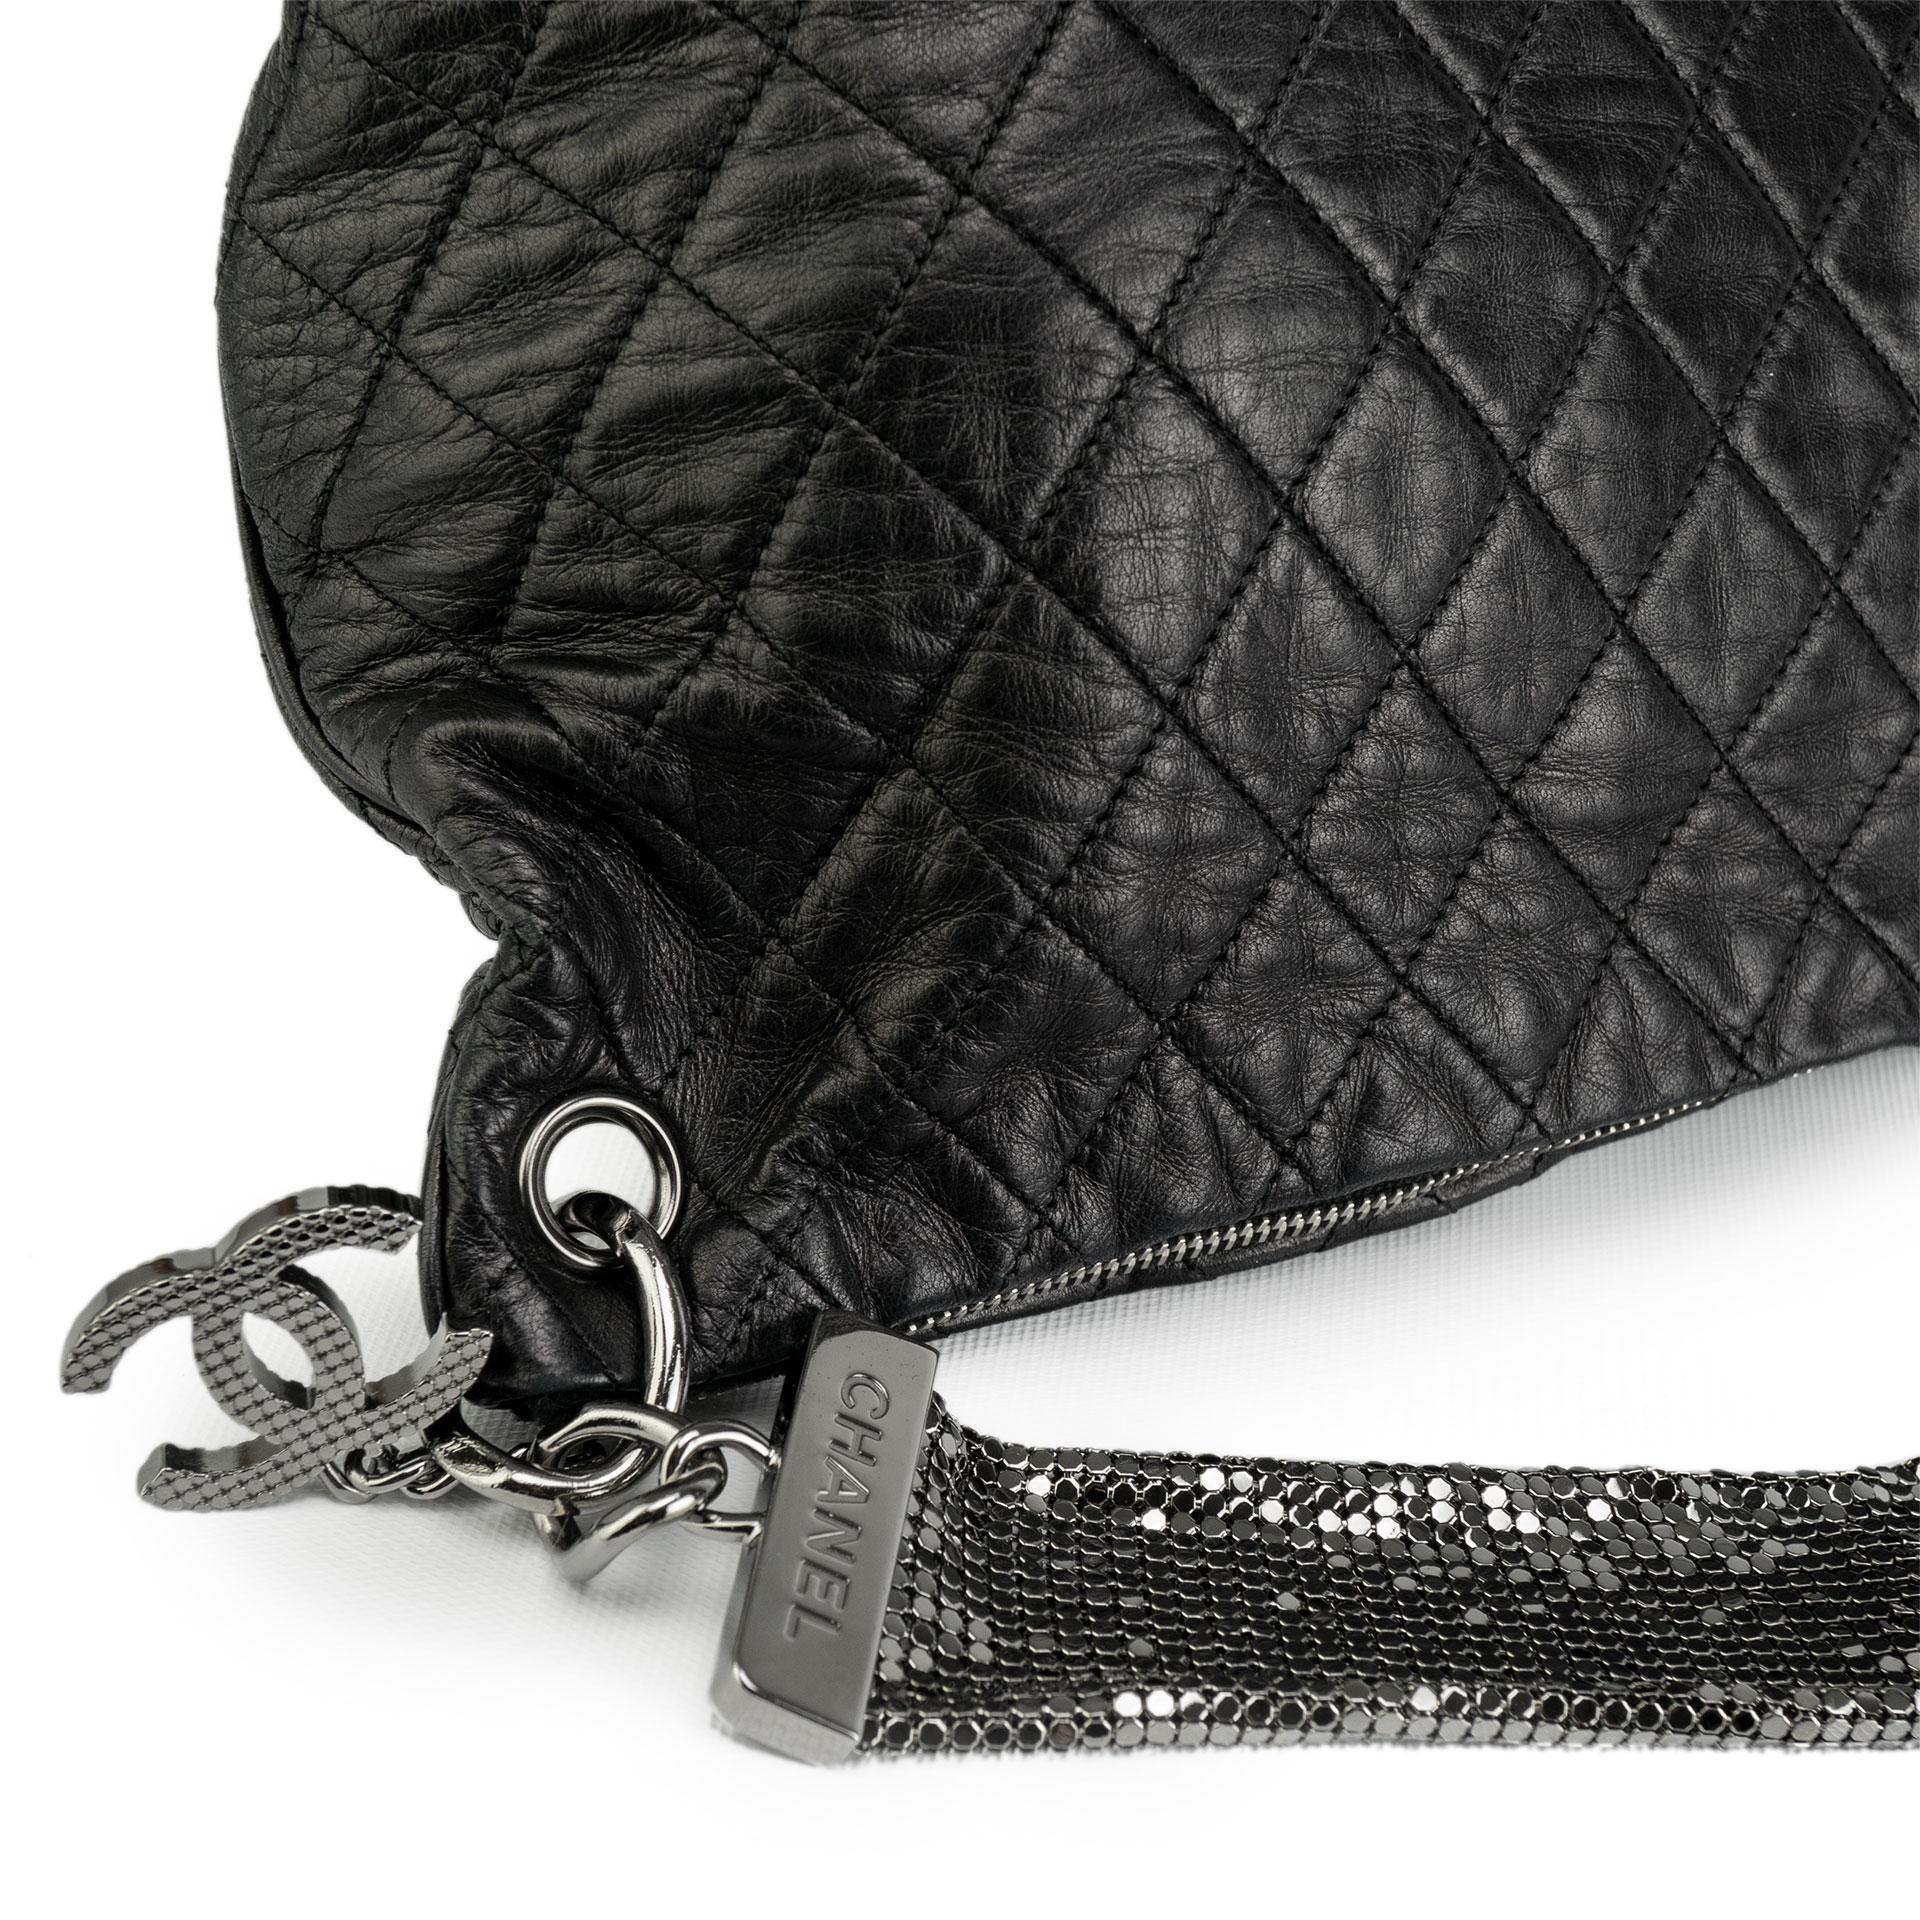 Chanel 2008 Metallic Mesh Soft Quilted Black Lambskin Leather Large Hobo Bag For Sale 4